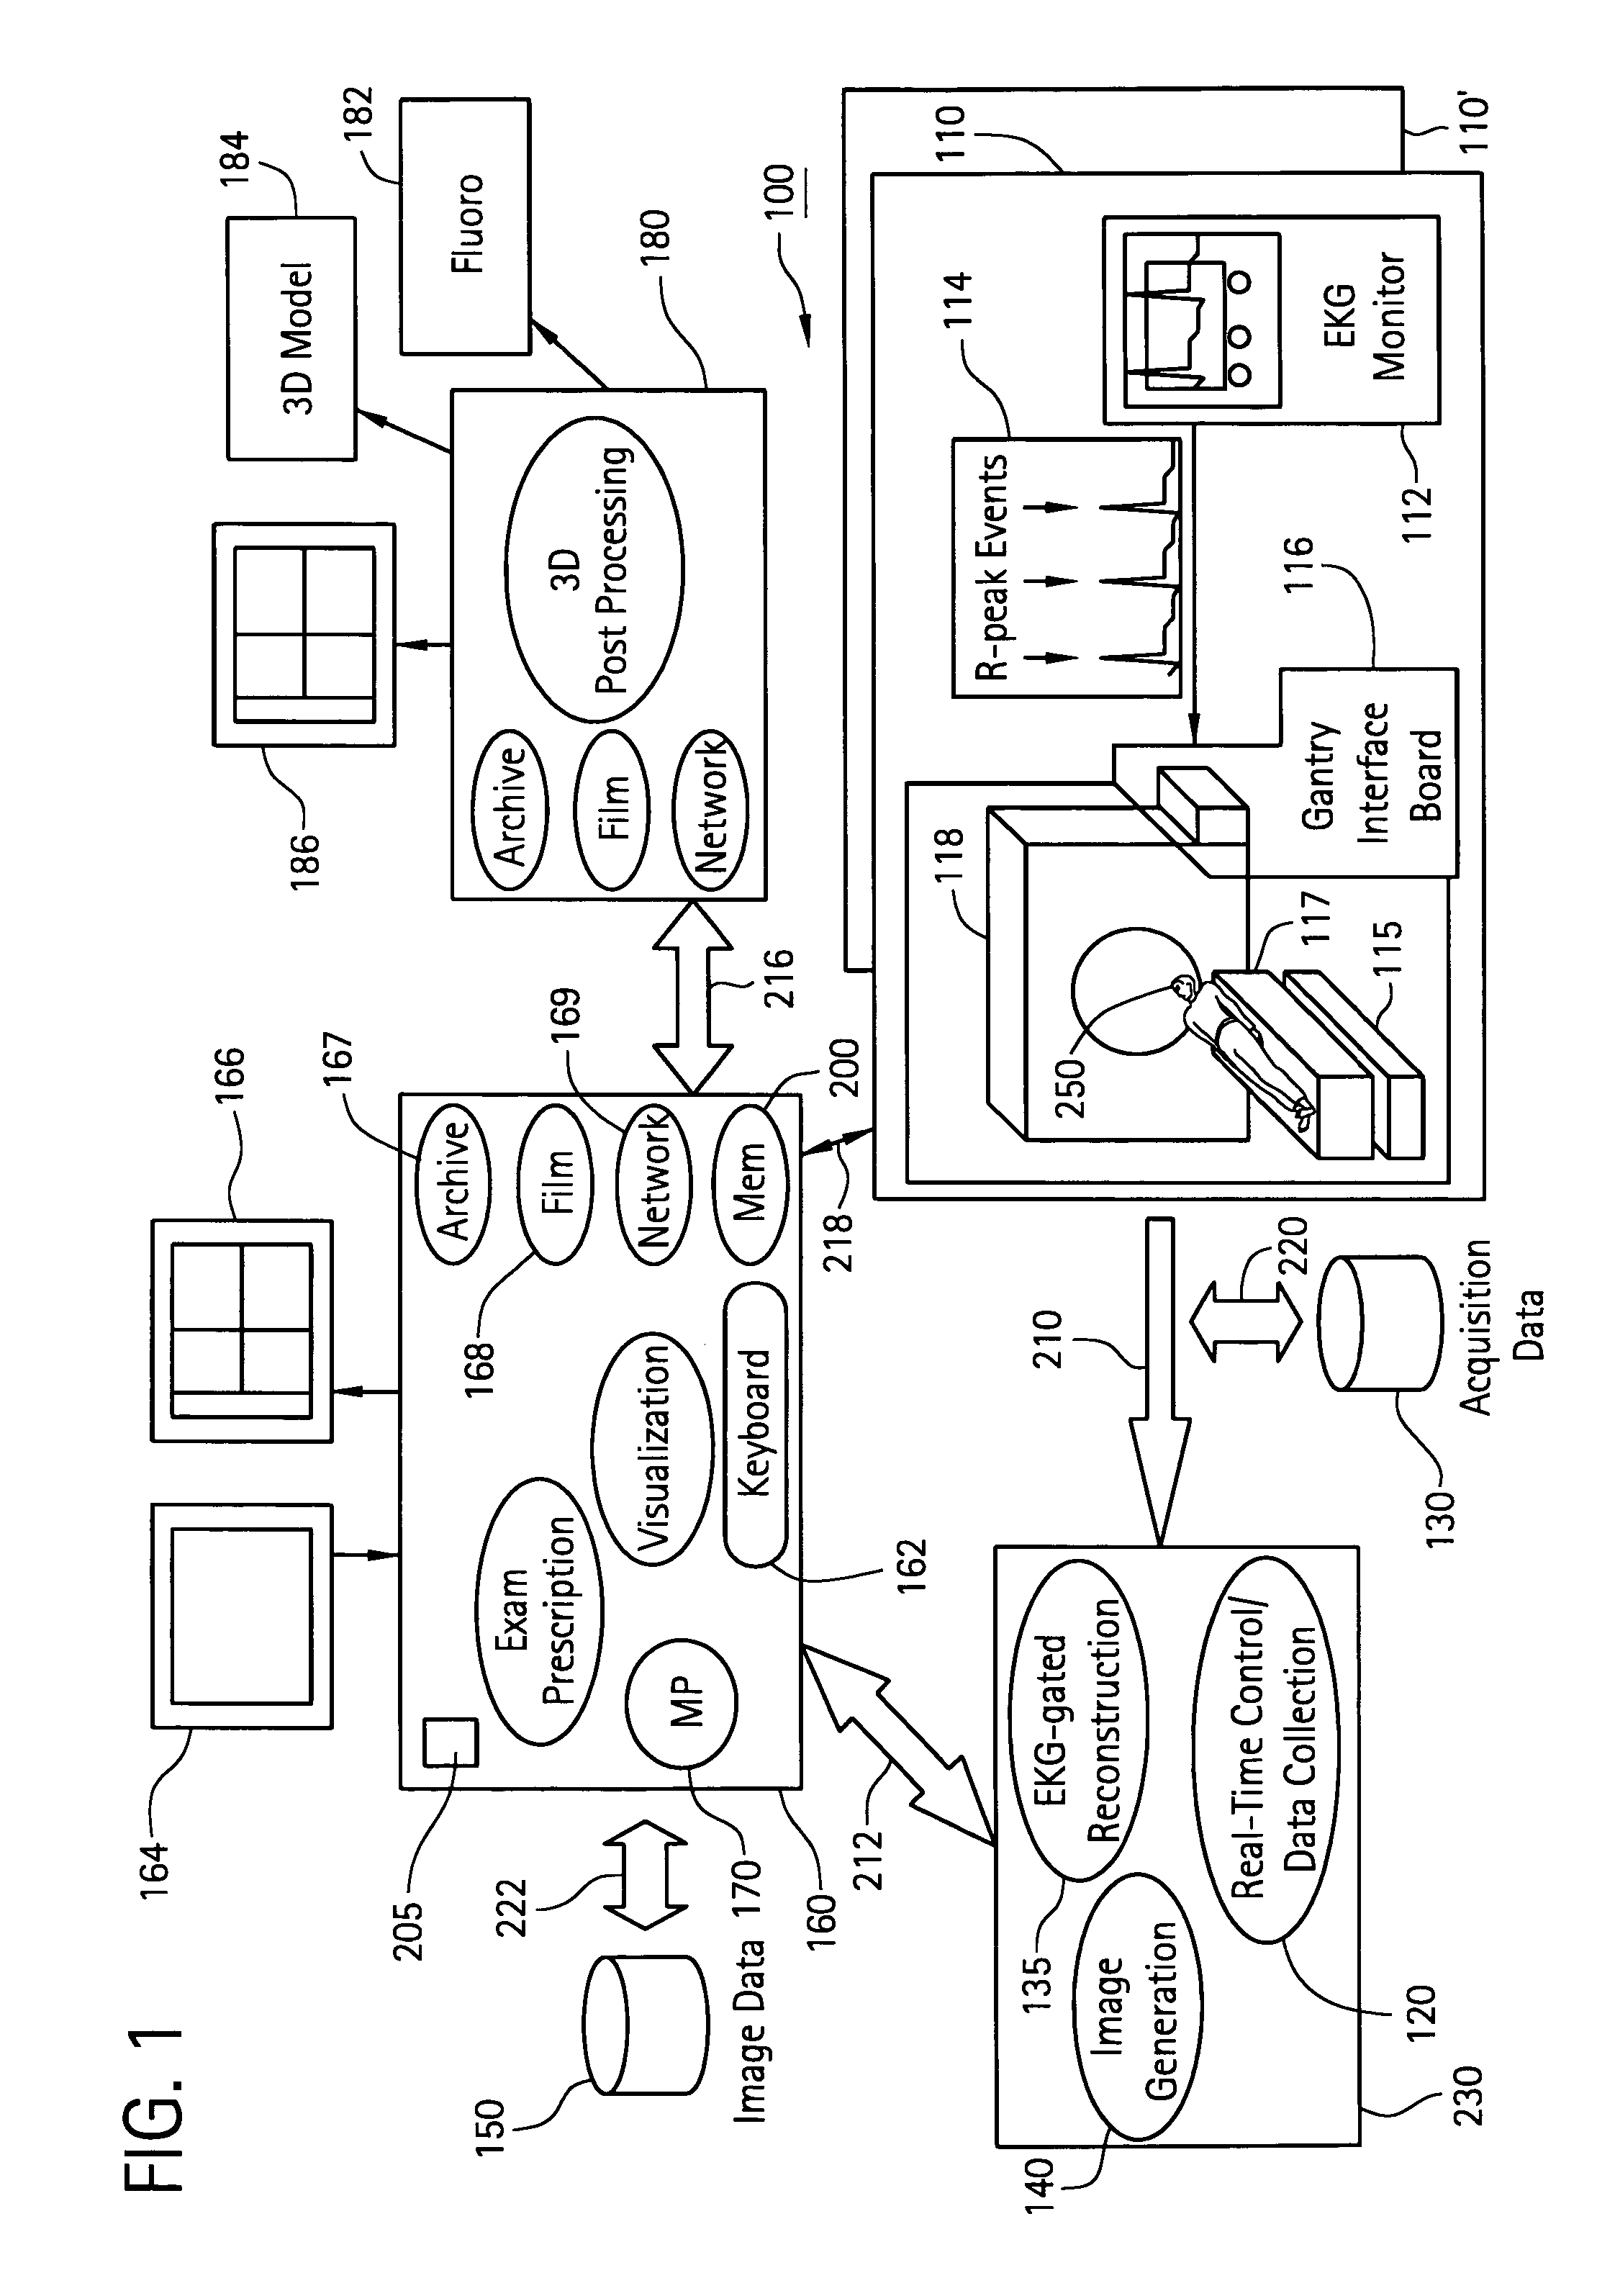 Method and system for registering 3D models of anatomical regions with projection images of the same